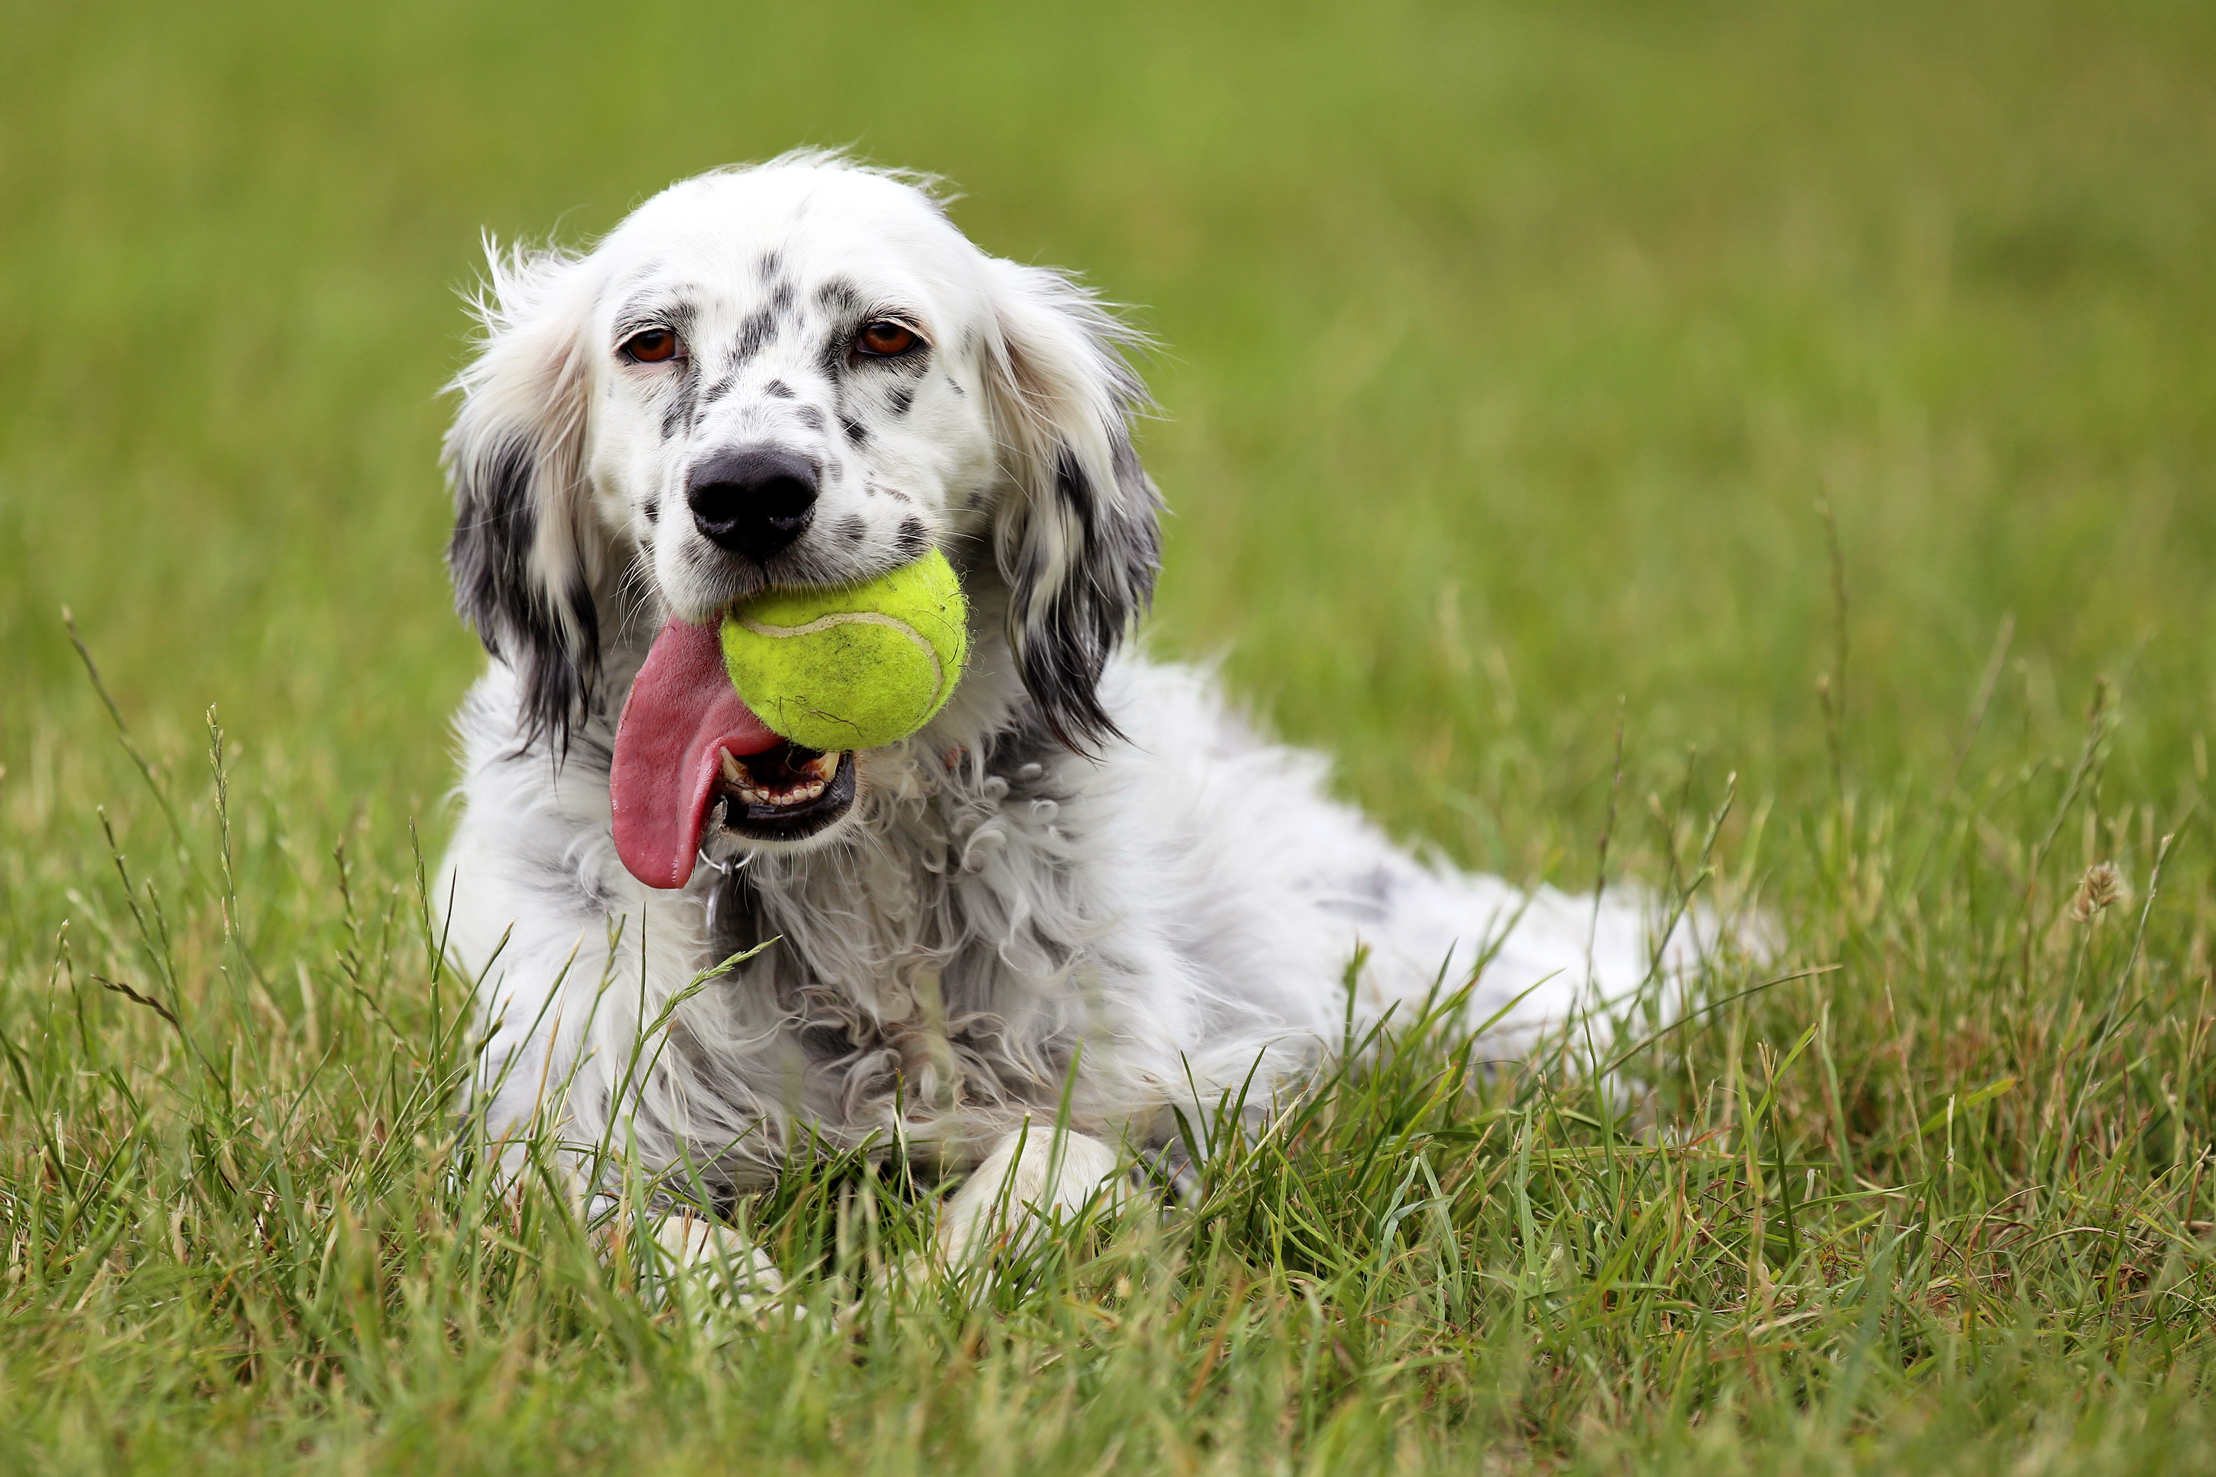 An English Setter dog holds a tennis ball in her mouth during a rest from playing